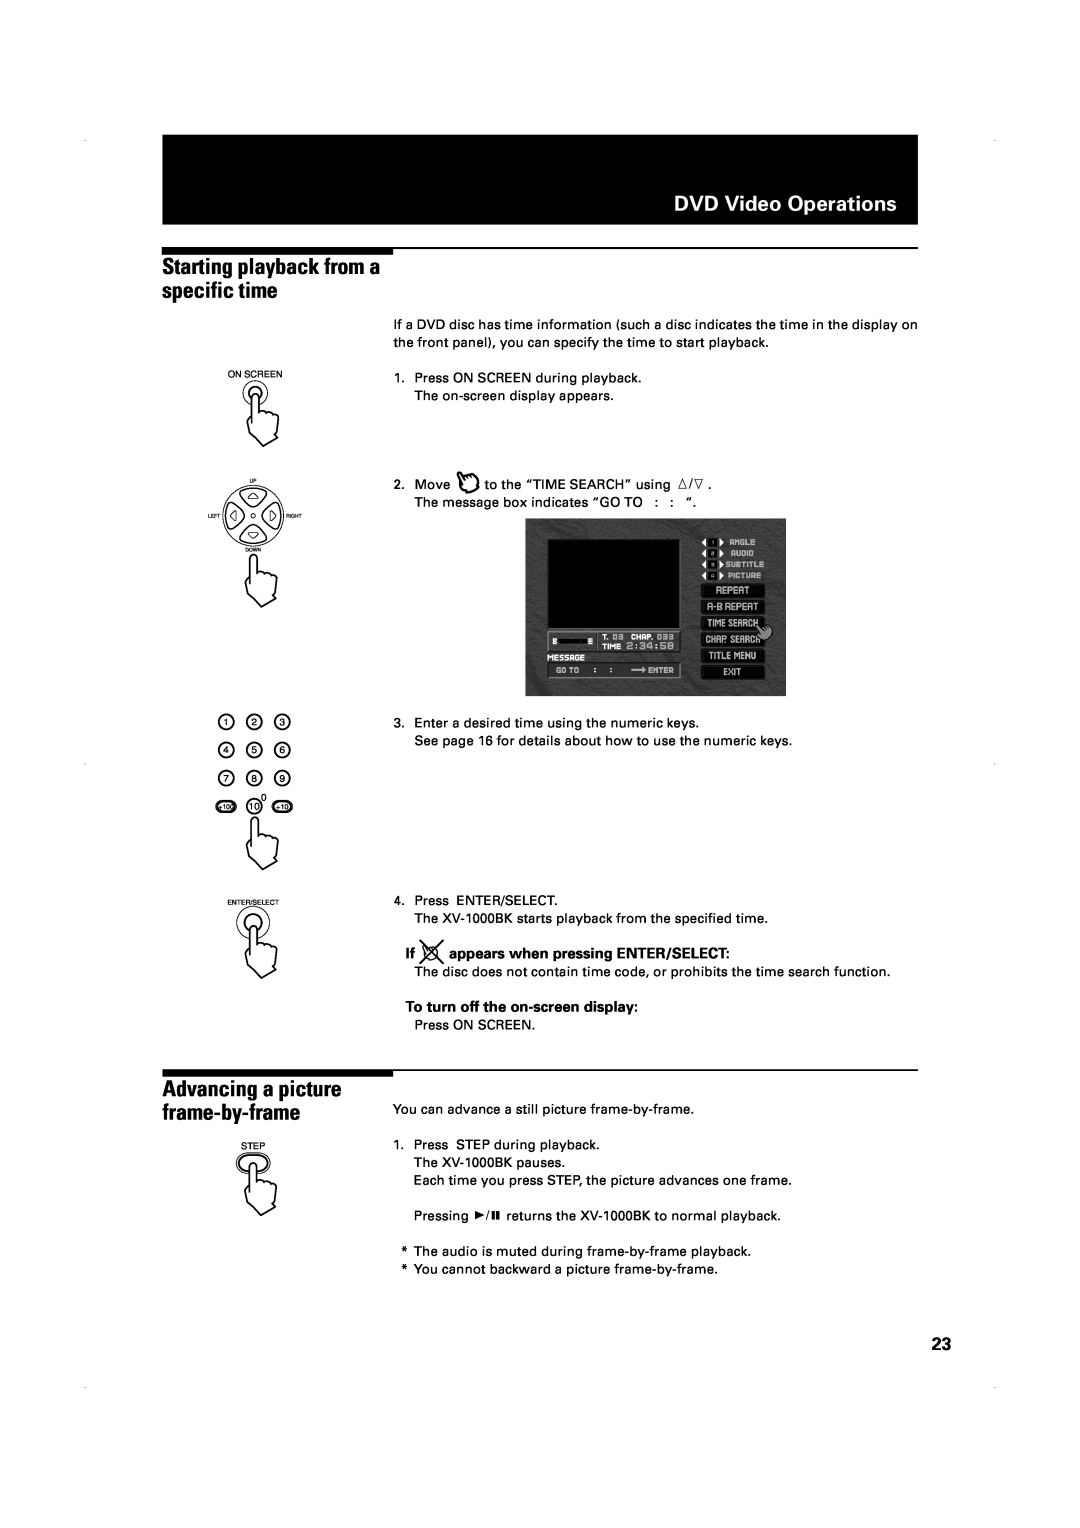 JVC XV-1000BK manual Starting playback from a specific time, Advancing a picture frame-by-frame, DVD Video Operations 